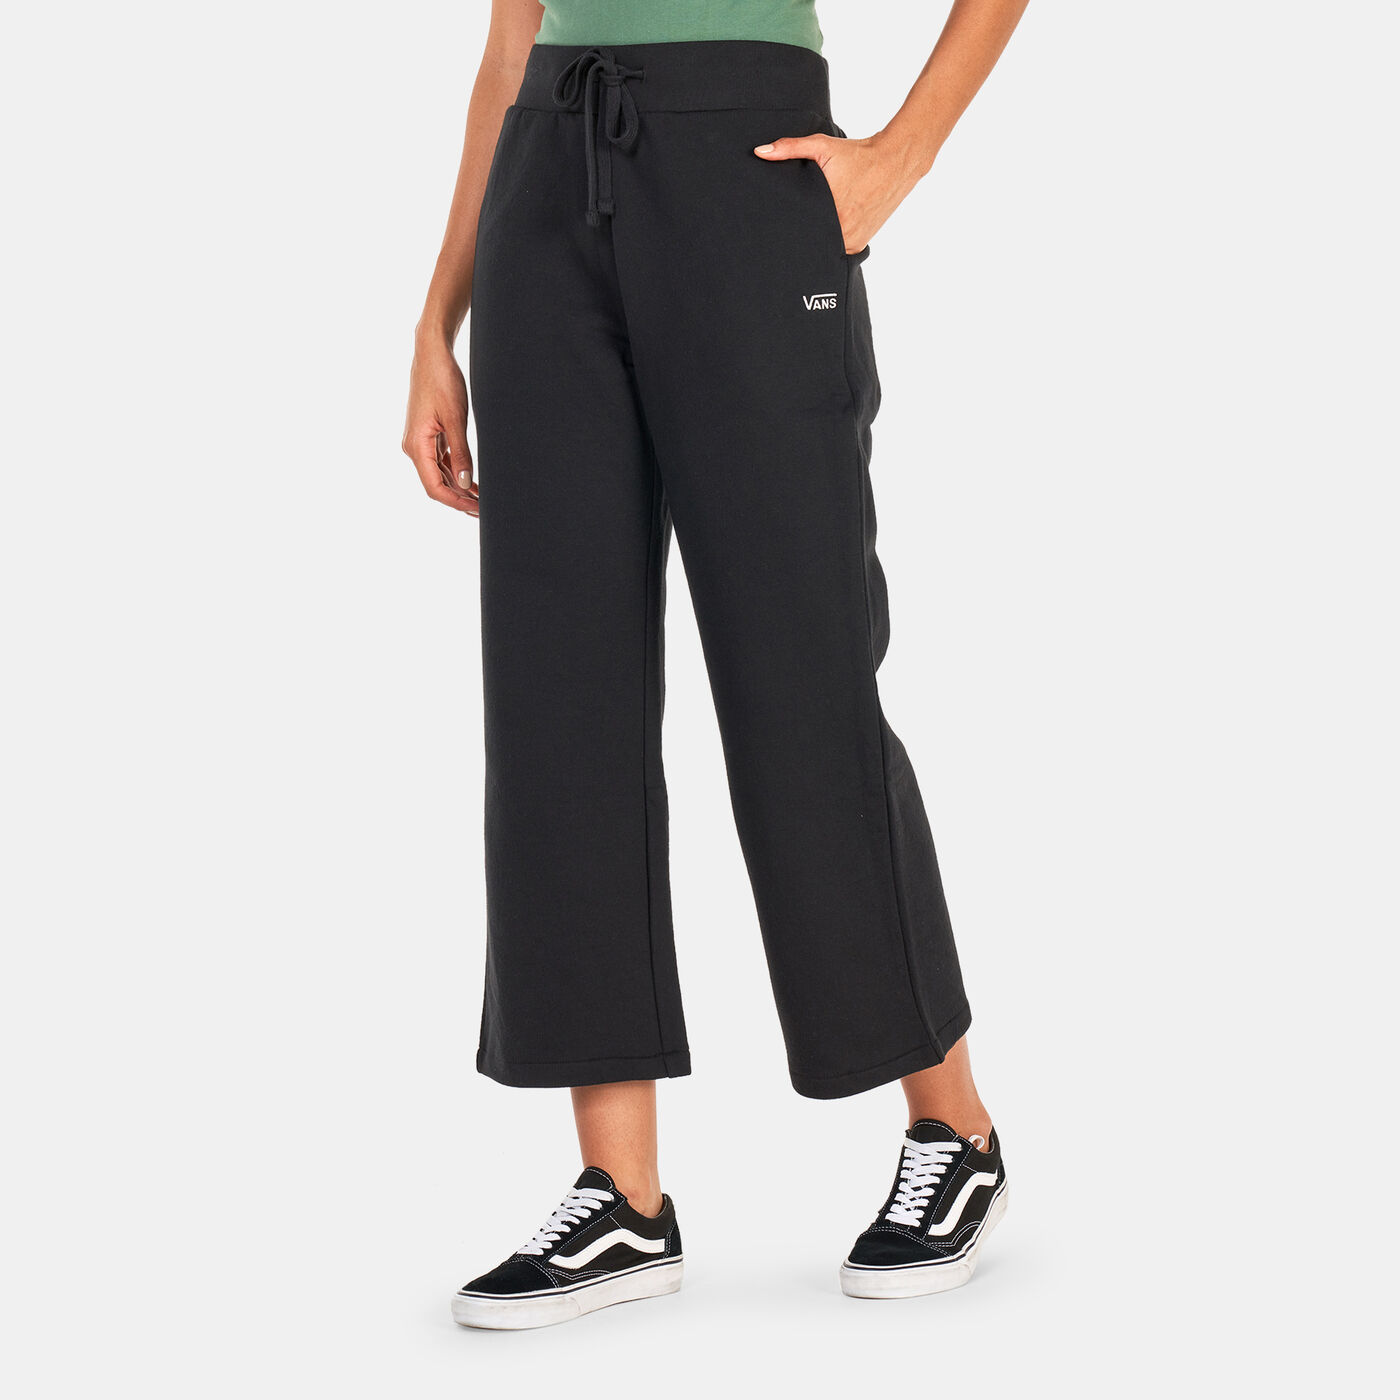 Women's Day Off Cropped Sweatpants